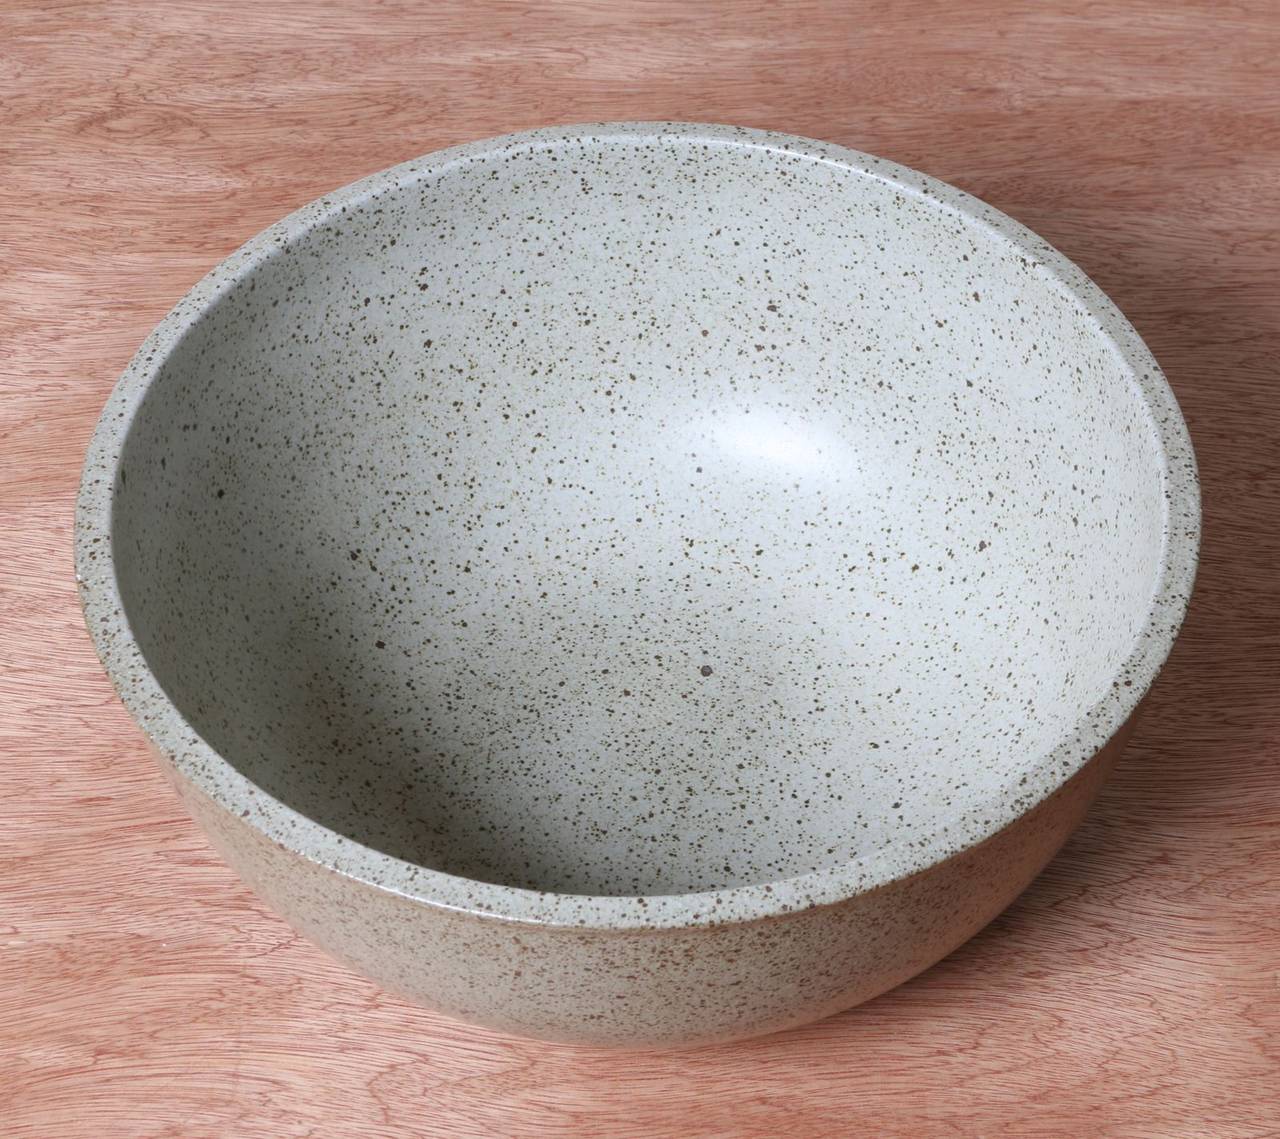 David Cressey Bowl for Architectural Pottery, Terra Major Gourmet-Ware 4